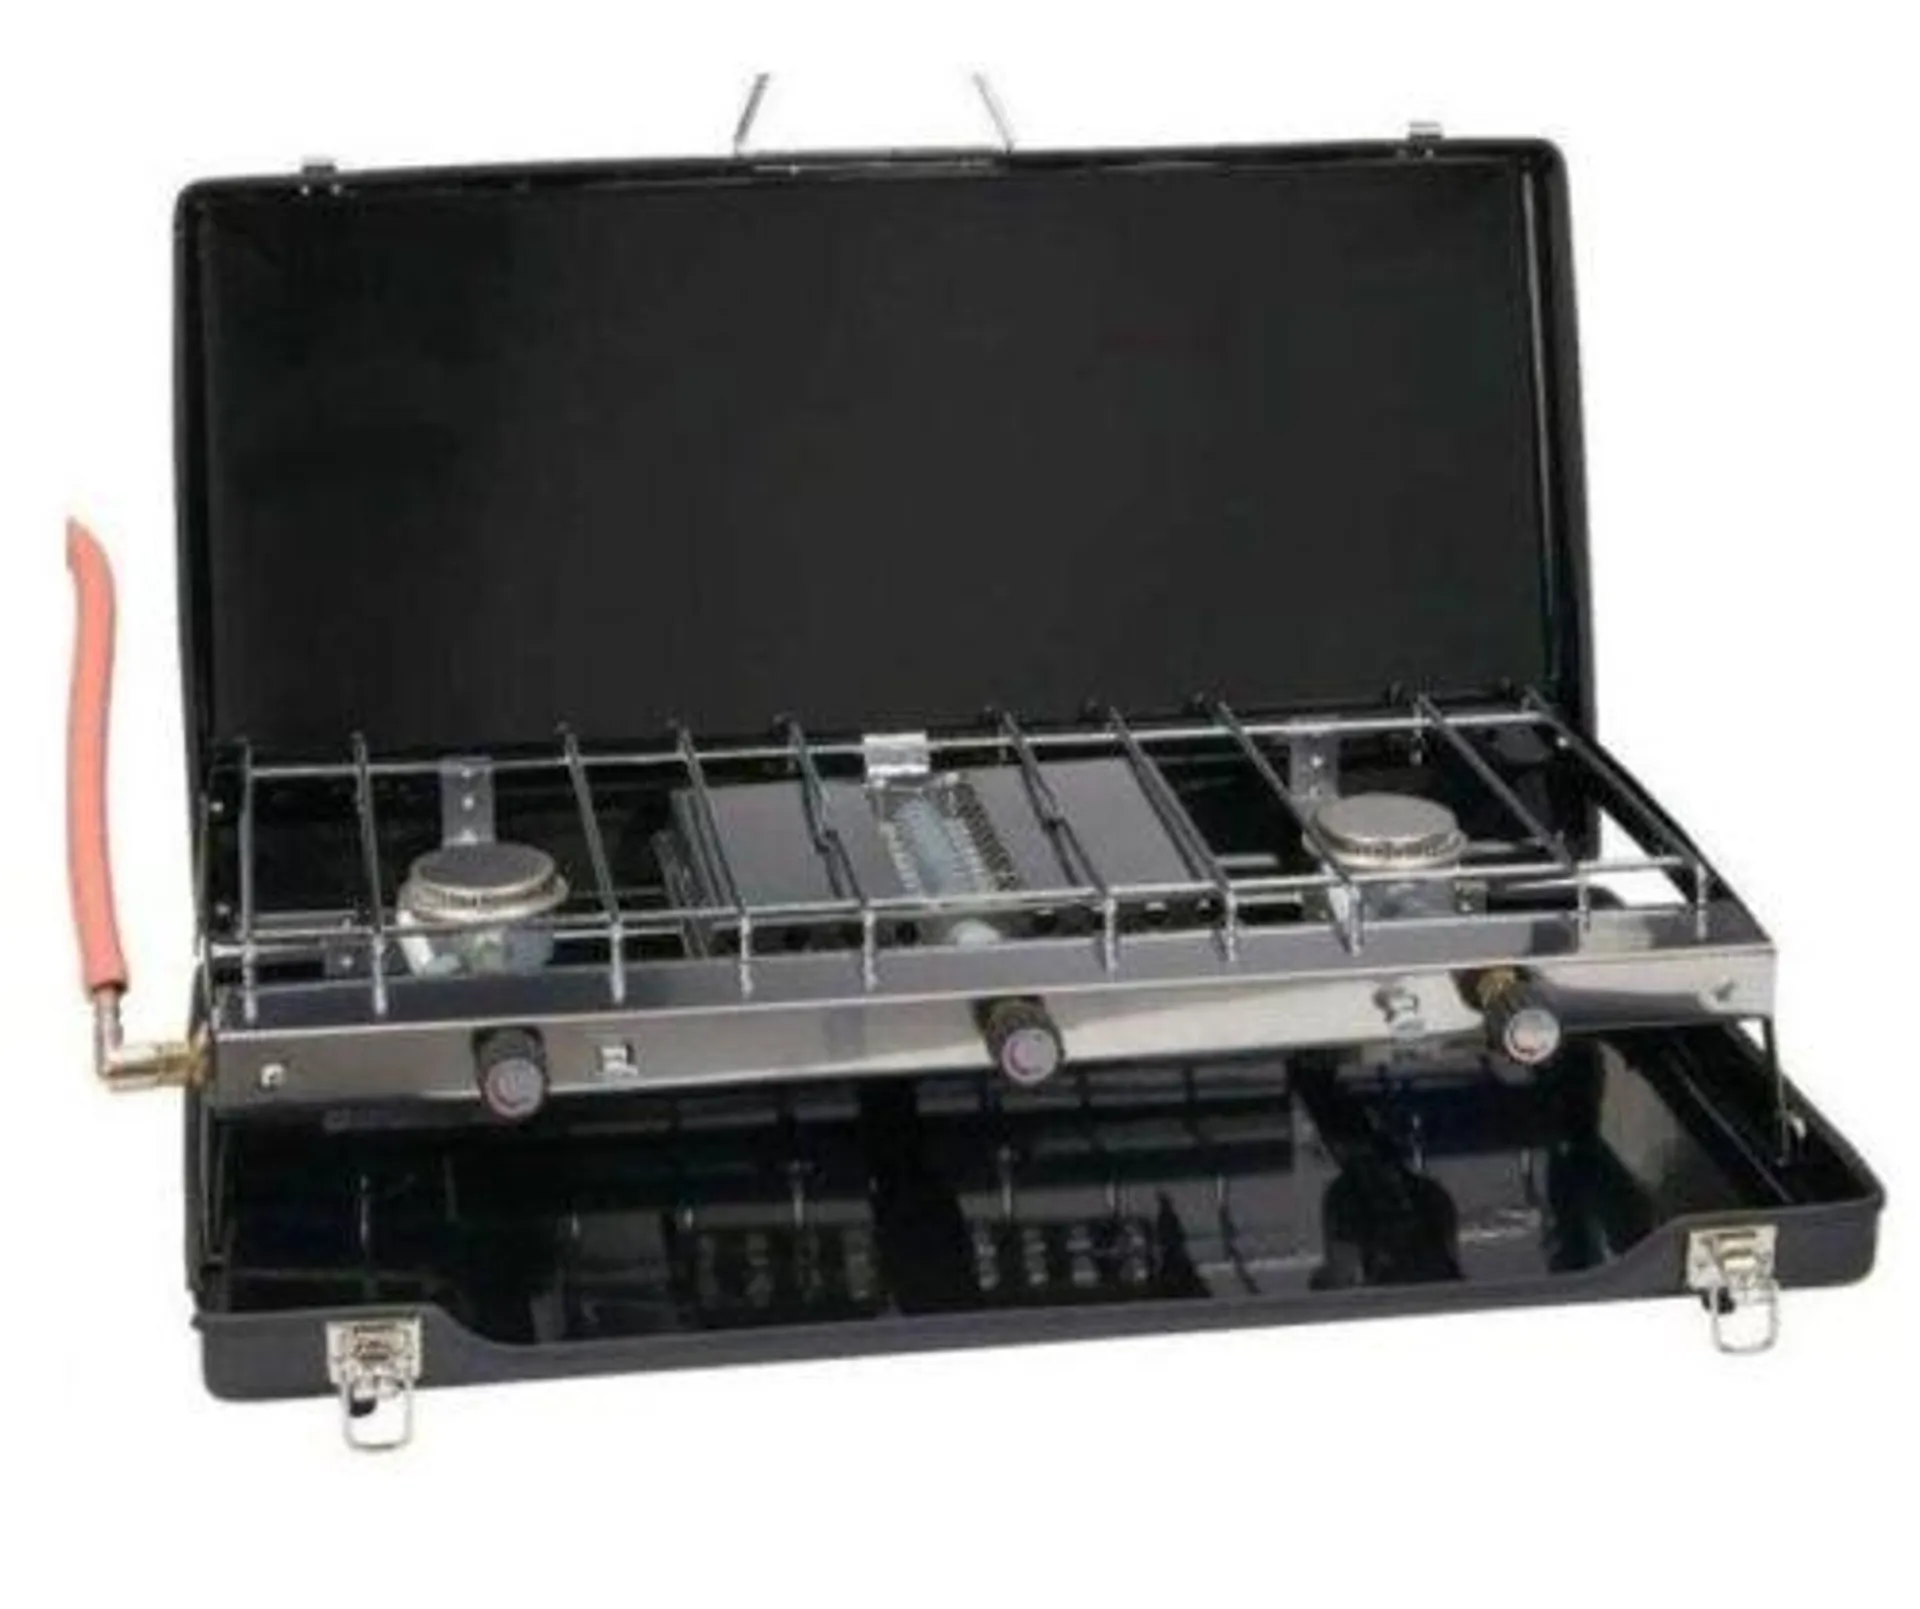 Go System Dynasty Trio (Double Burner Stove with Grill)